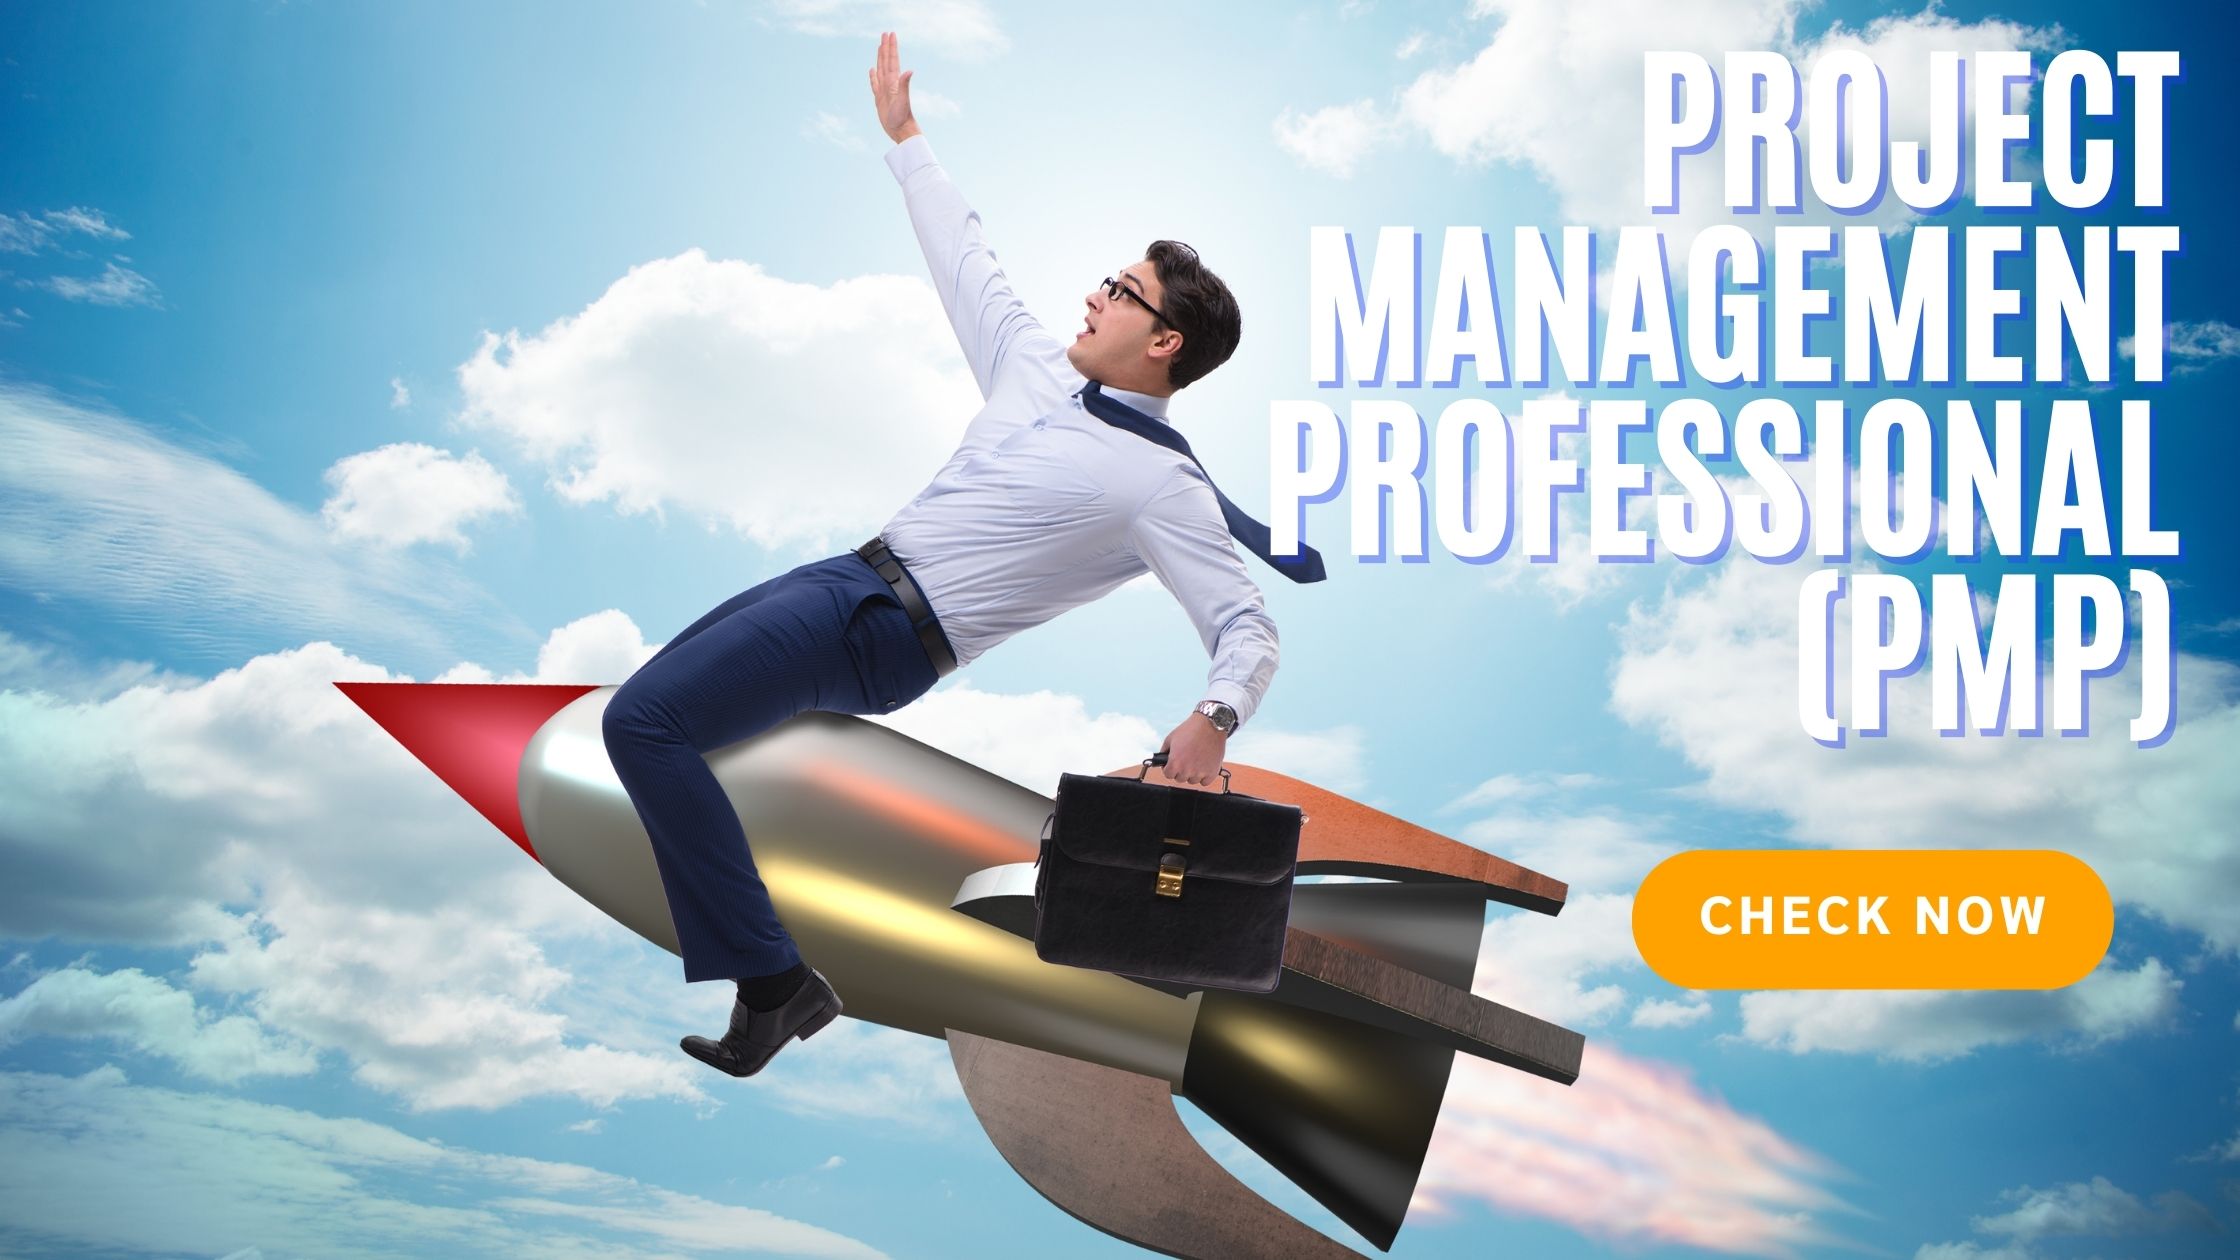 Project Management Professional (PMP) as a Career